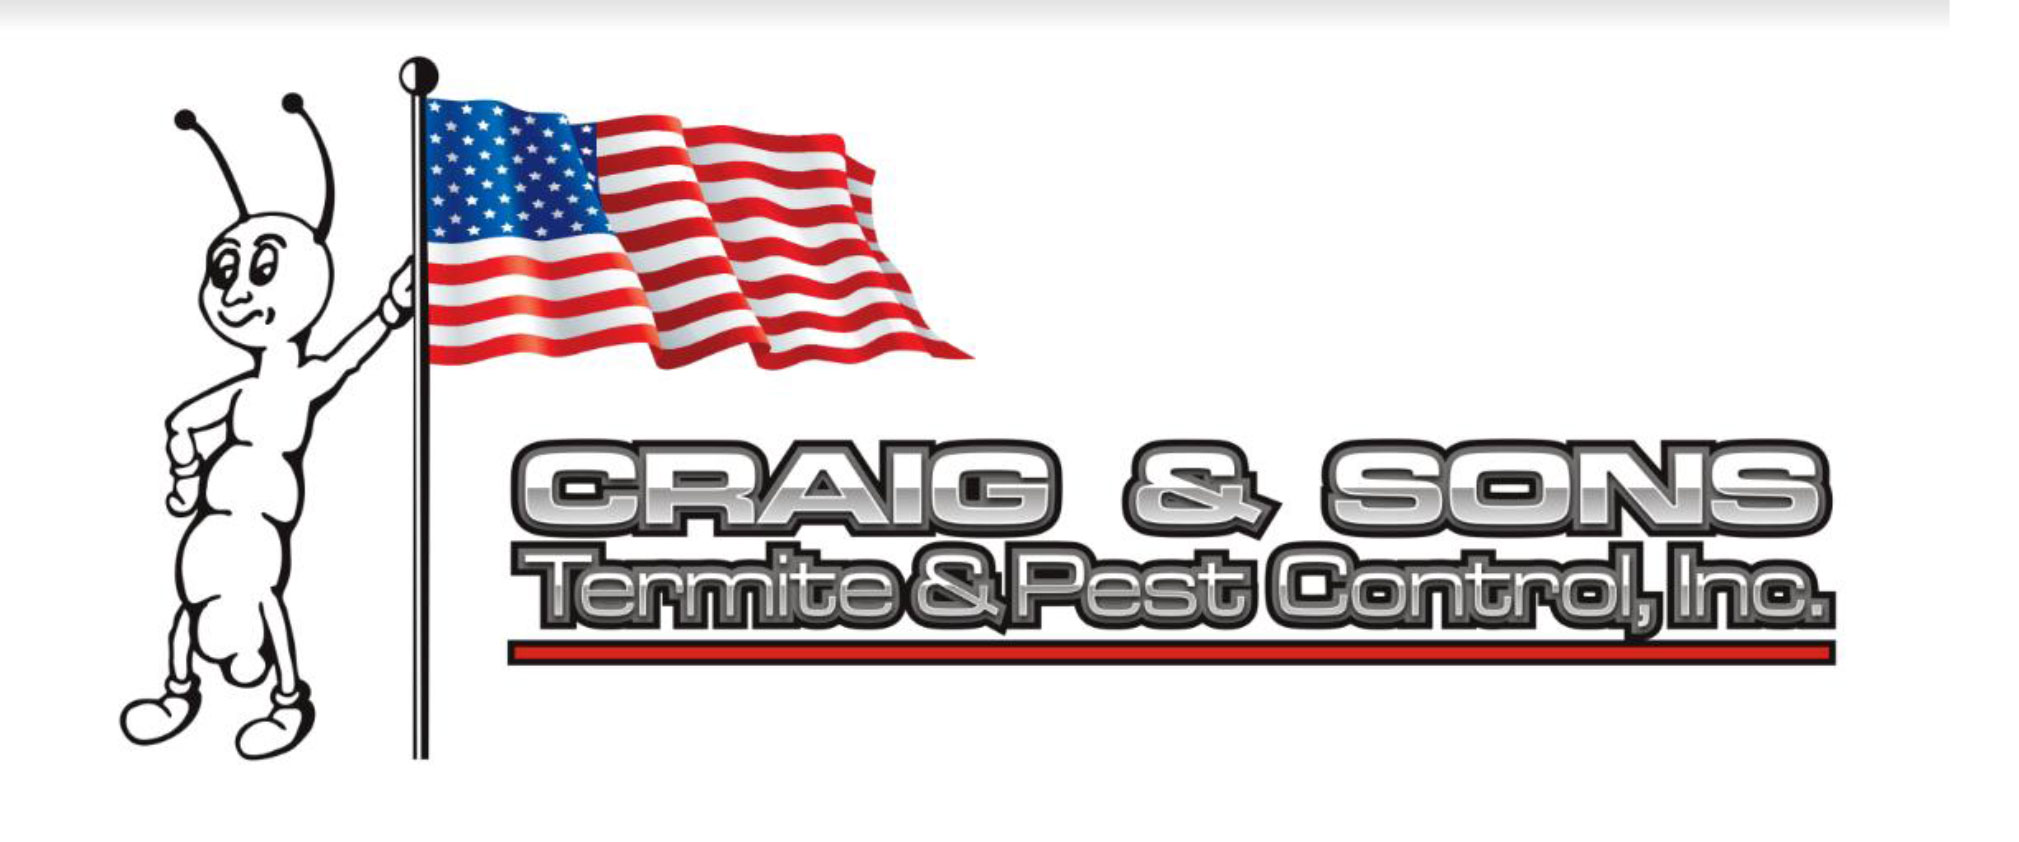 Craig & Sons Termite & Pest Control Best of the Inland Empire